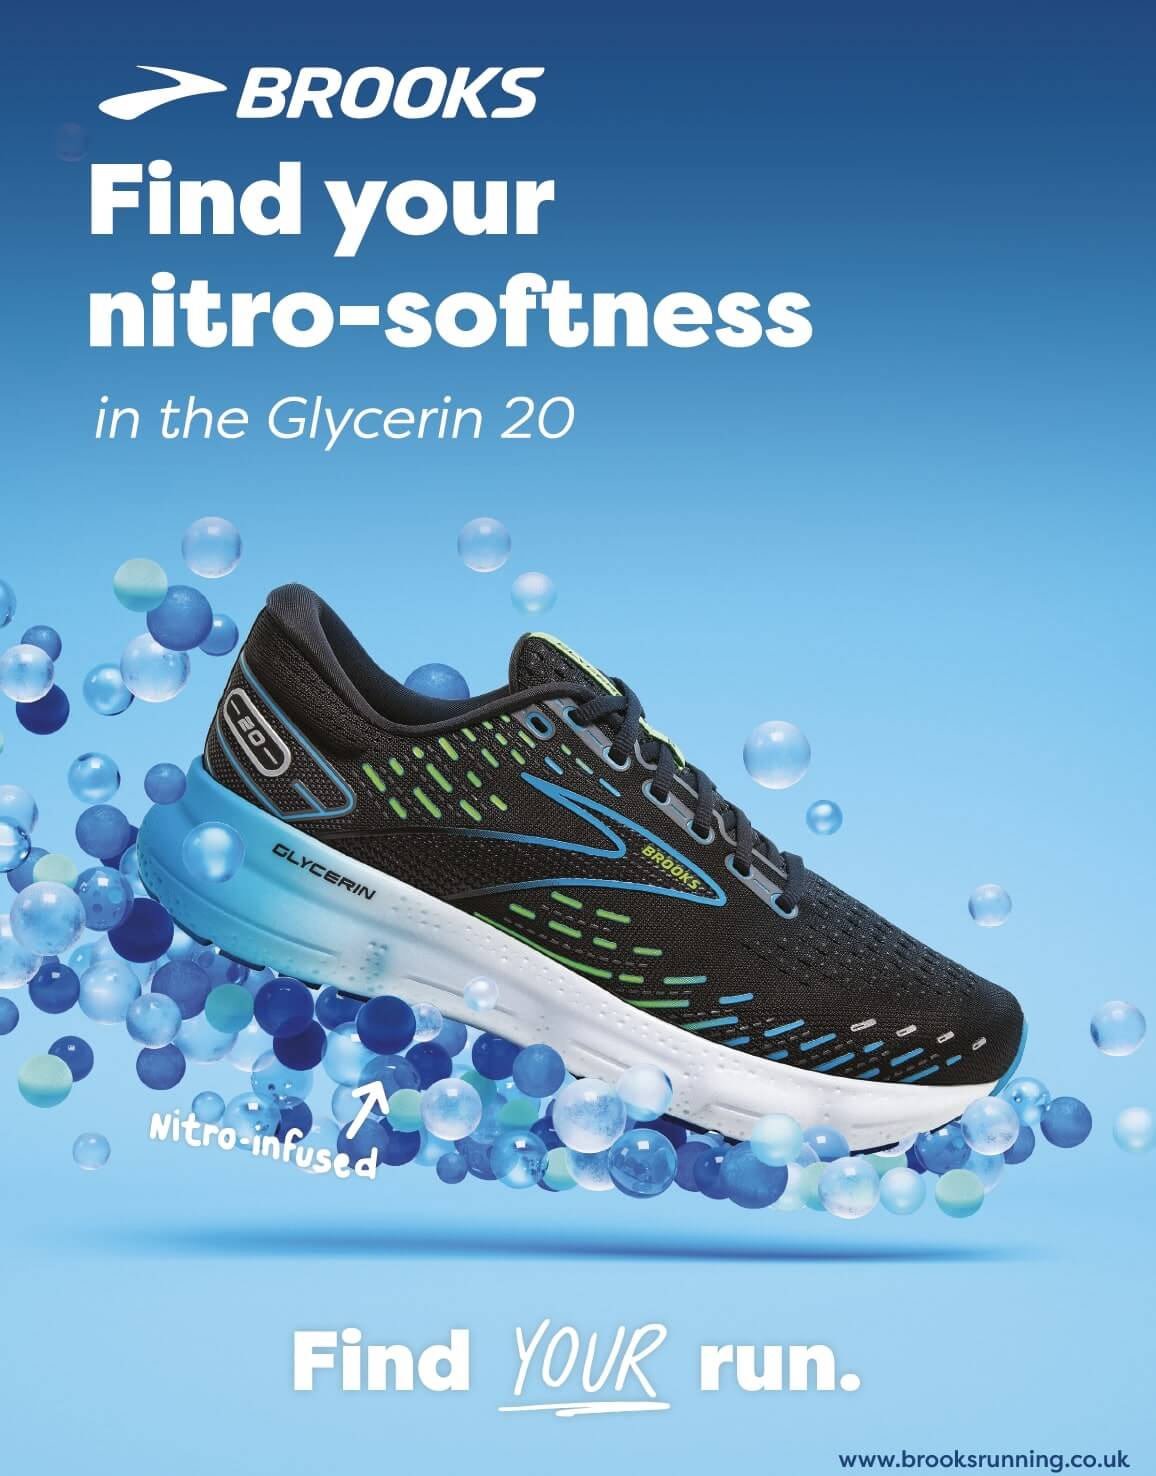 Product shot of the Brooks Glycerin 20